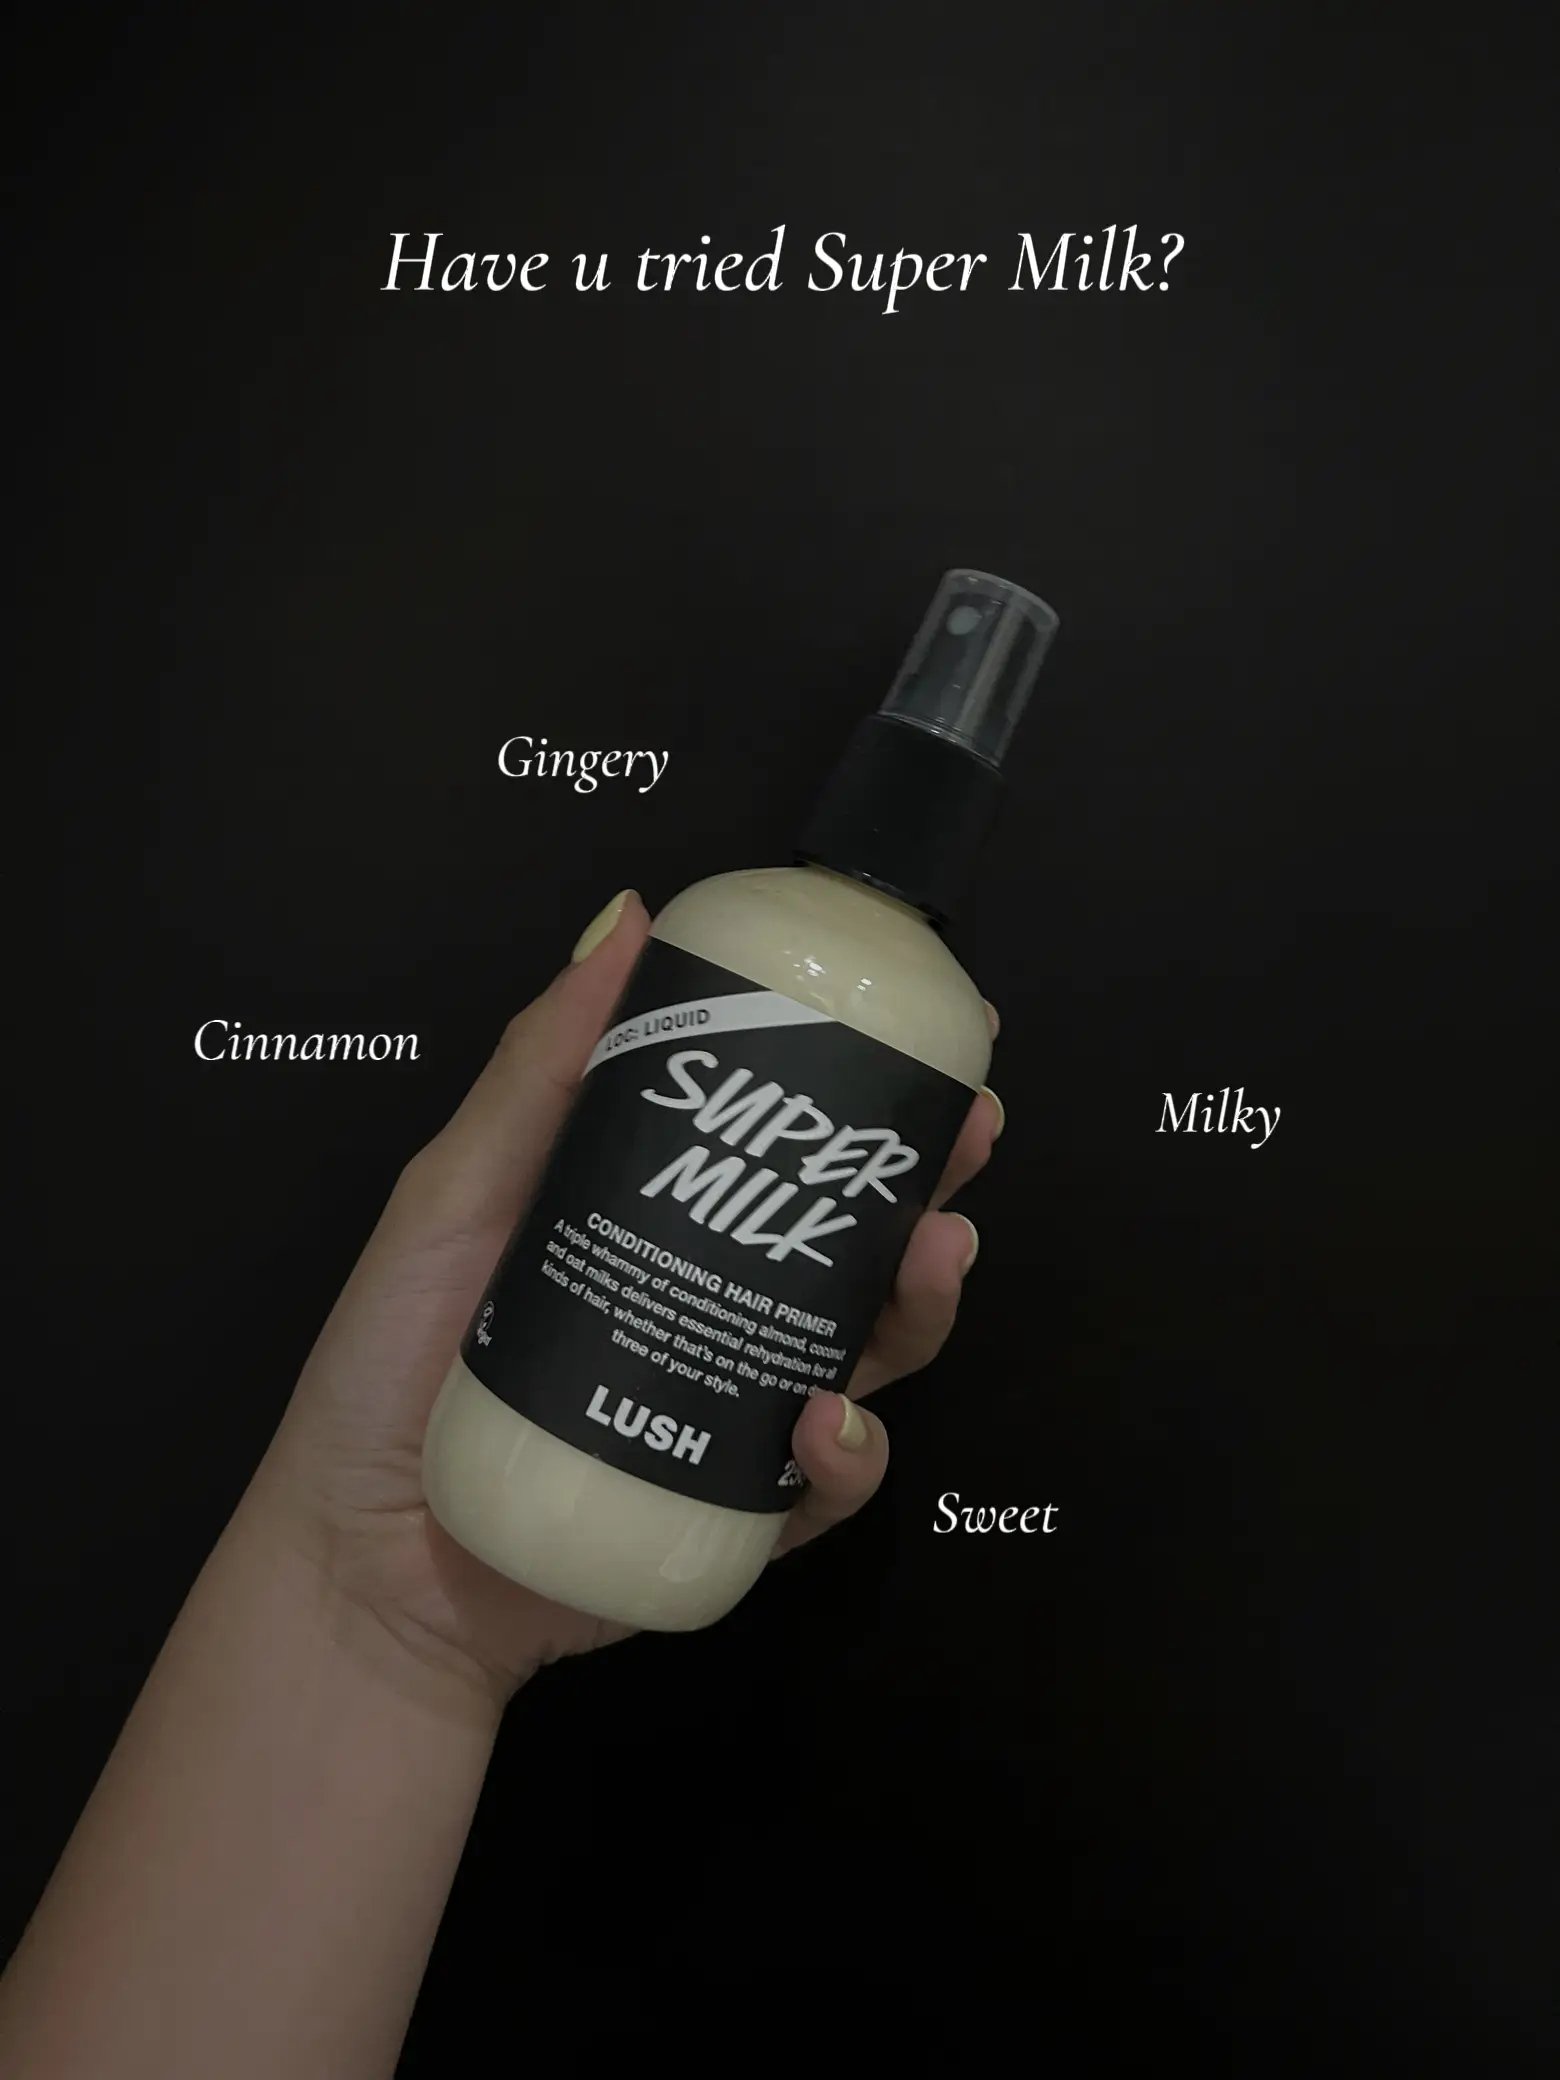 Super Milk from Lush, Gallery posted by Kerxuannn